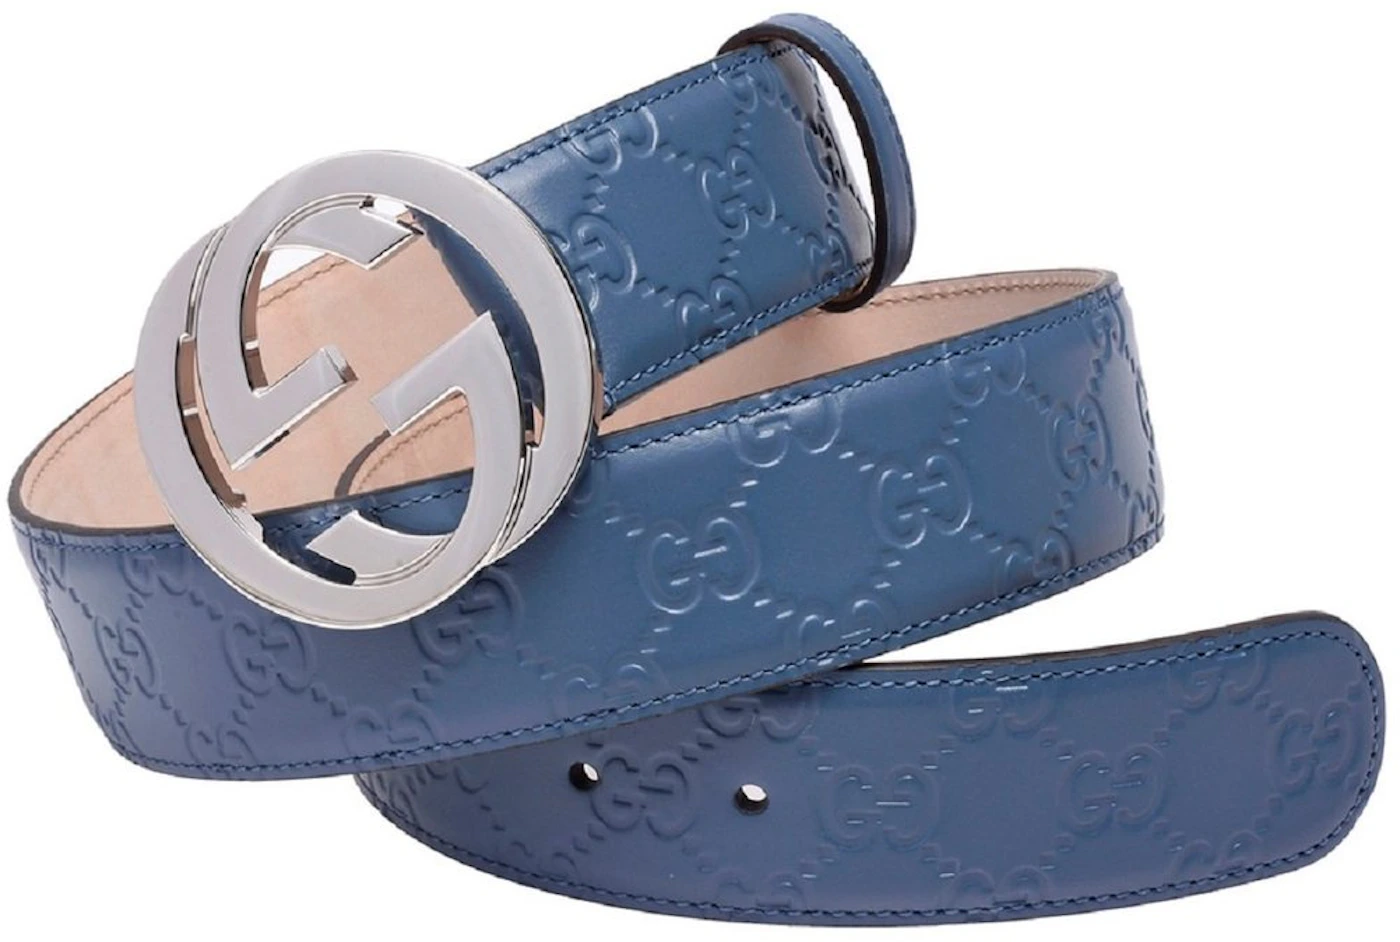 Gucci Leather Belt With Double G Buckle - Light Blue Leather